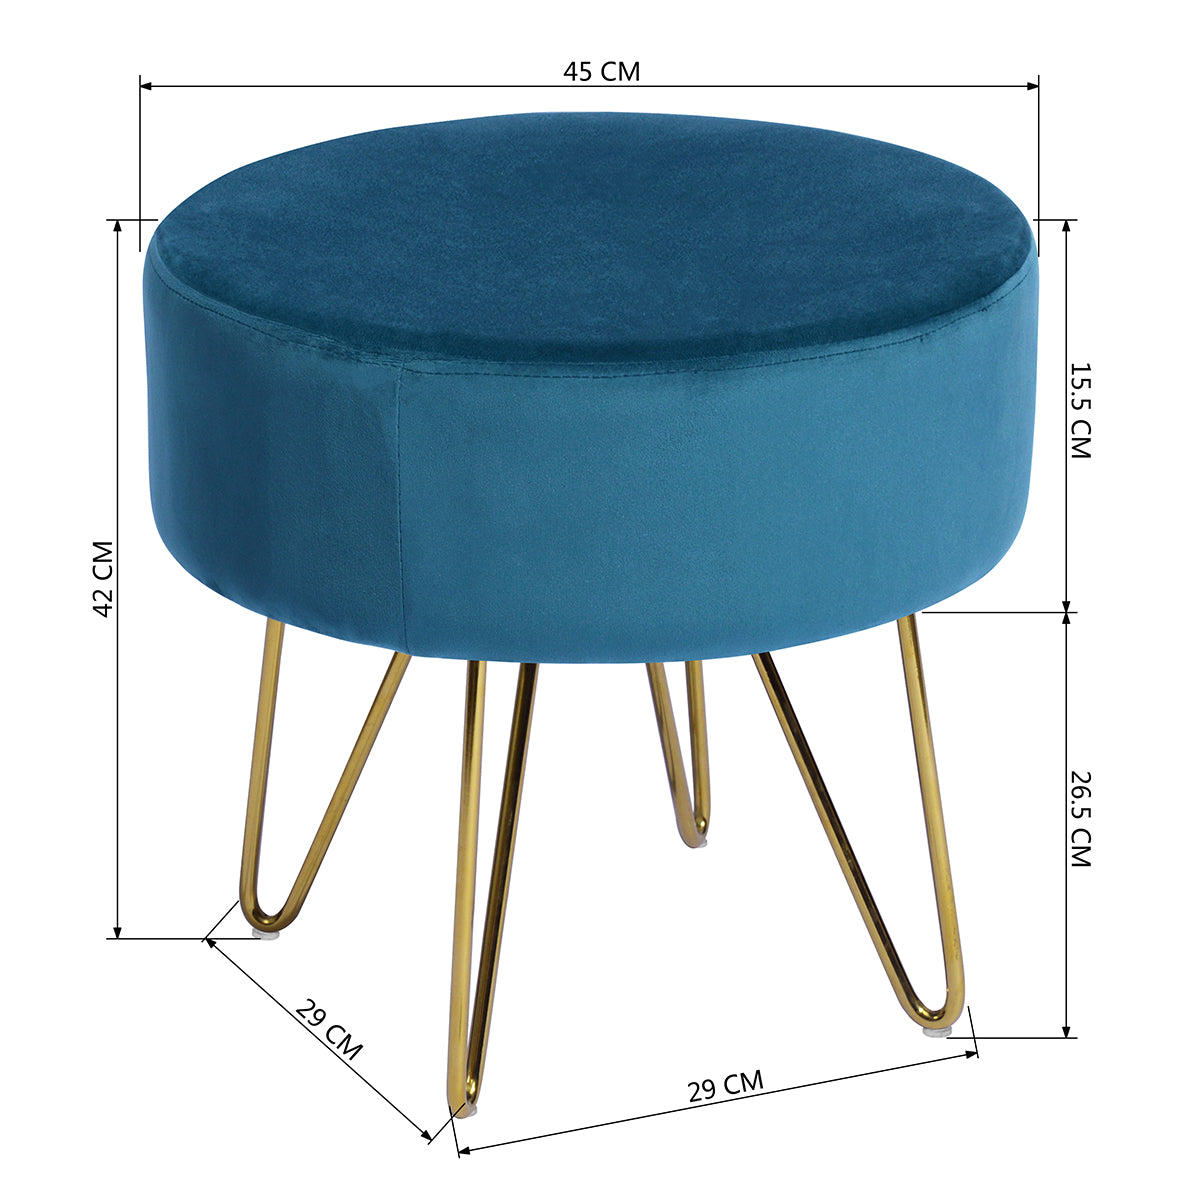 Teal and Gold Decorative Round Shaped Ottoman with Metal Legs